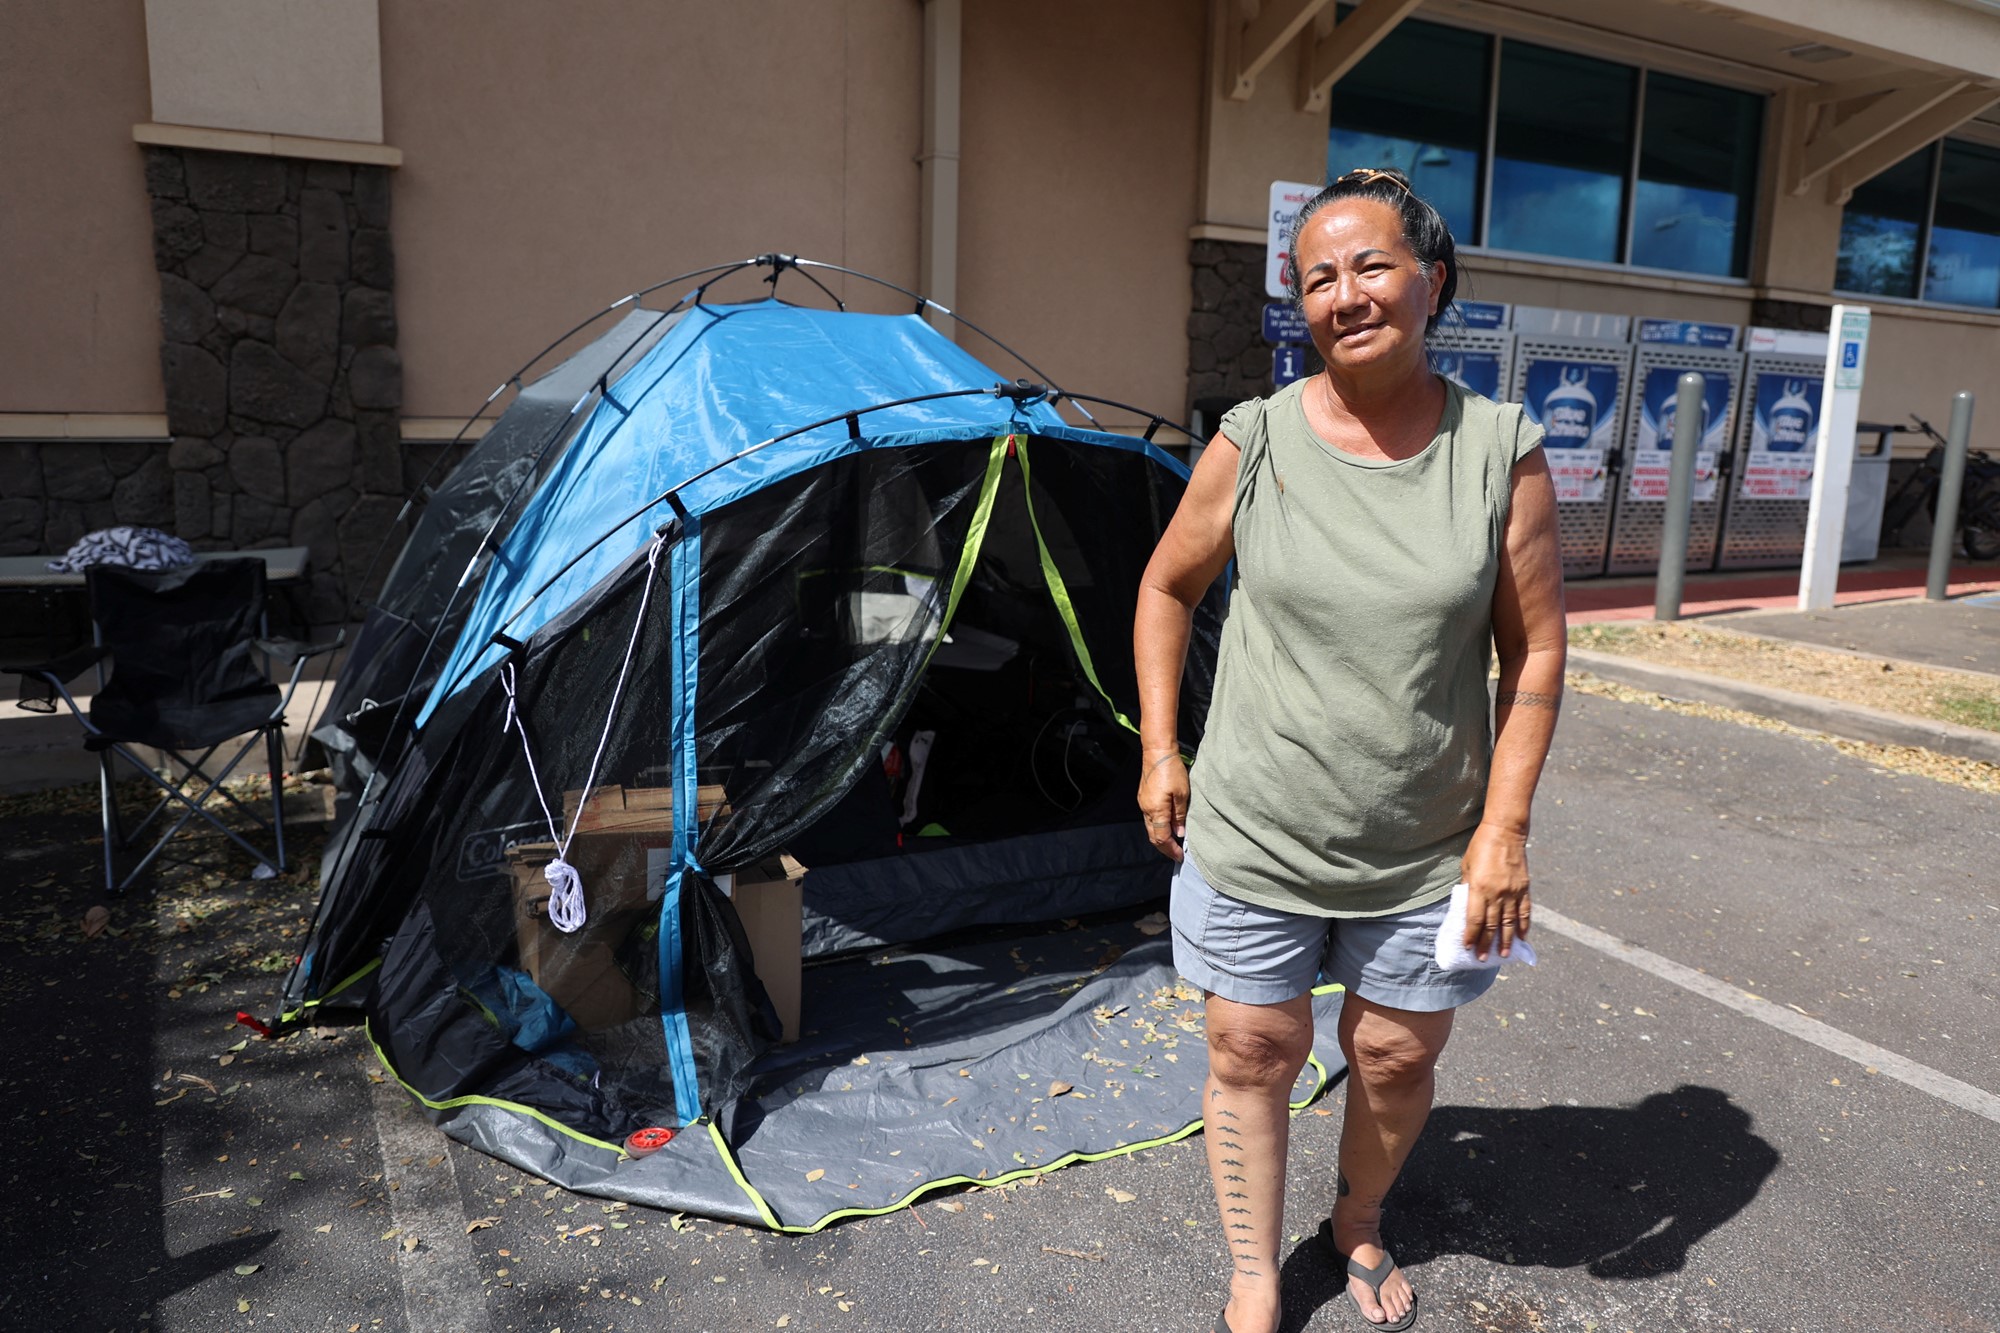 Local resident Uilani Kapu stands in front of her tent in a strip-mall parking lot, as she helps oversee the distribution of donated food, clothing, baby formula and other essentials to neighbors who have lost everything